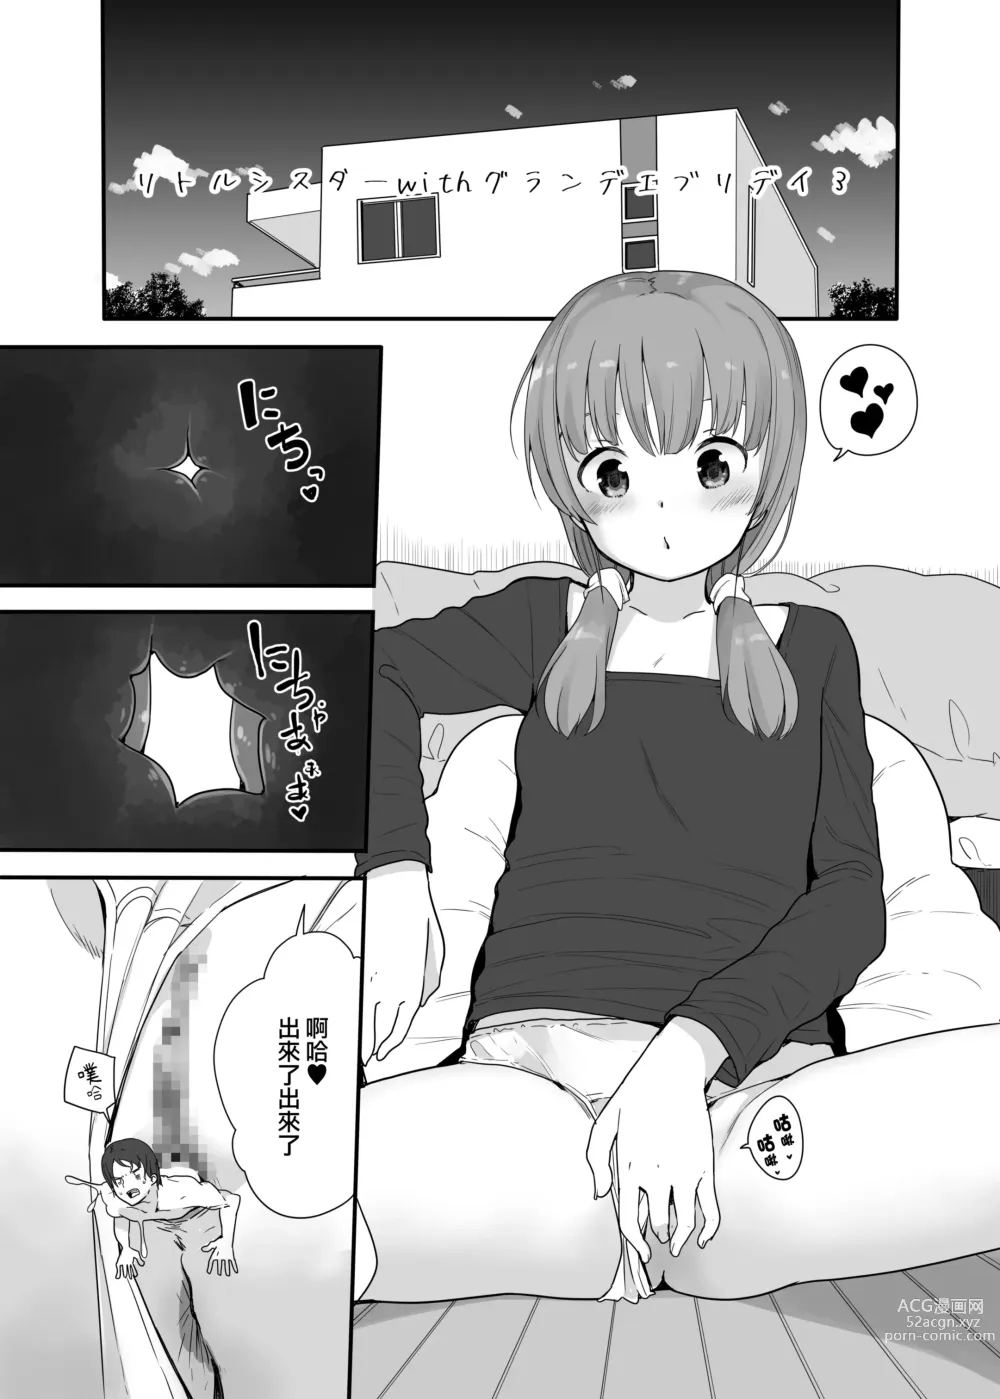 Page 2 of doujinshi Little Sister With Grande Everyday 3